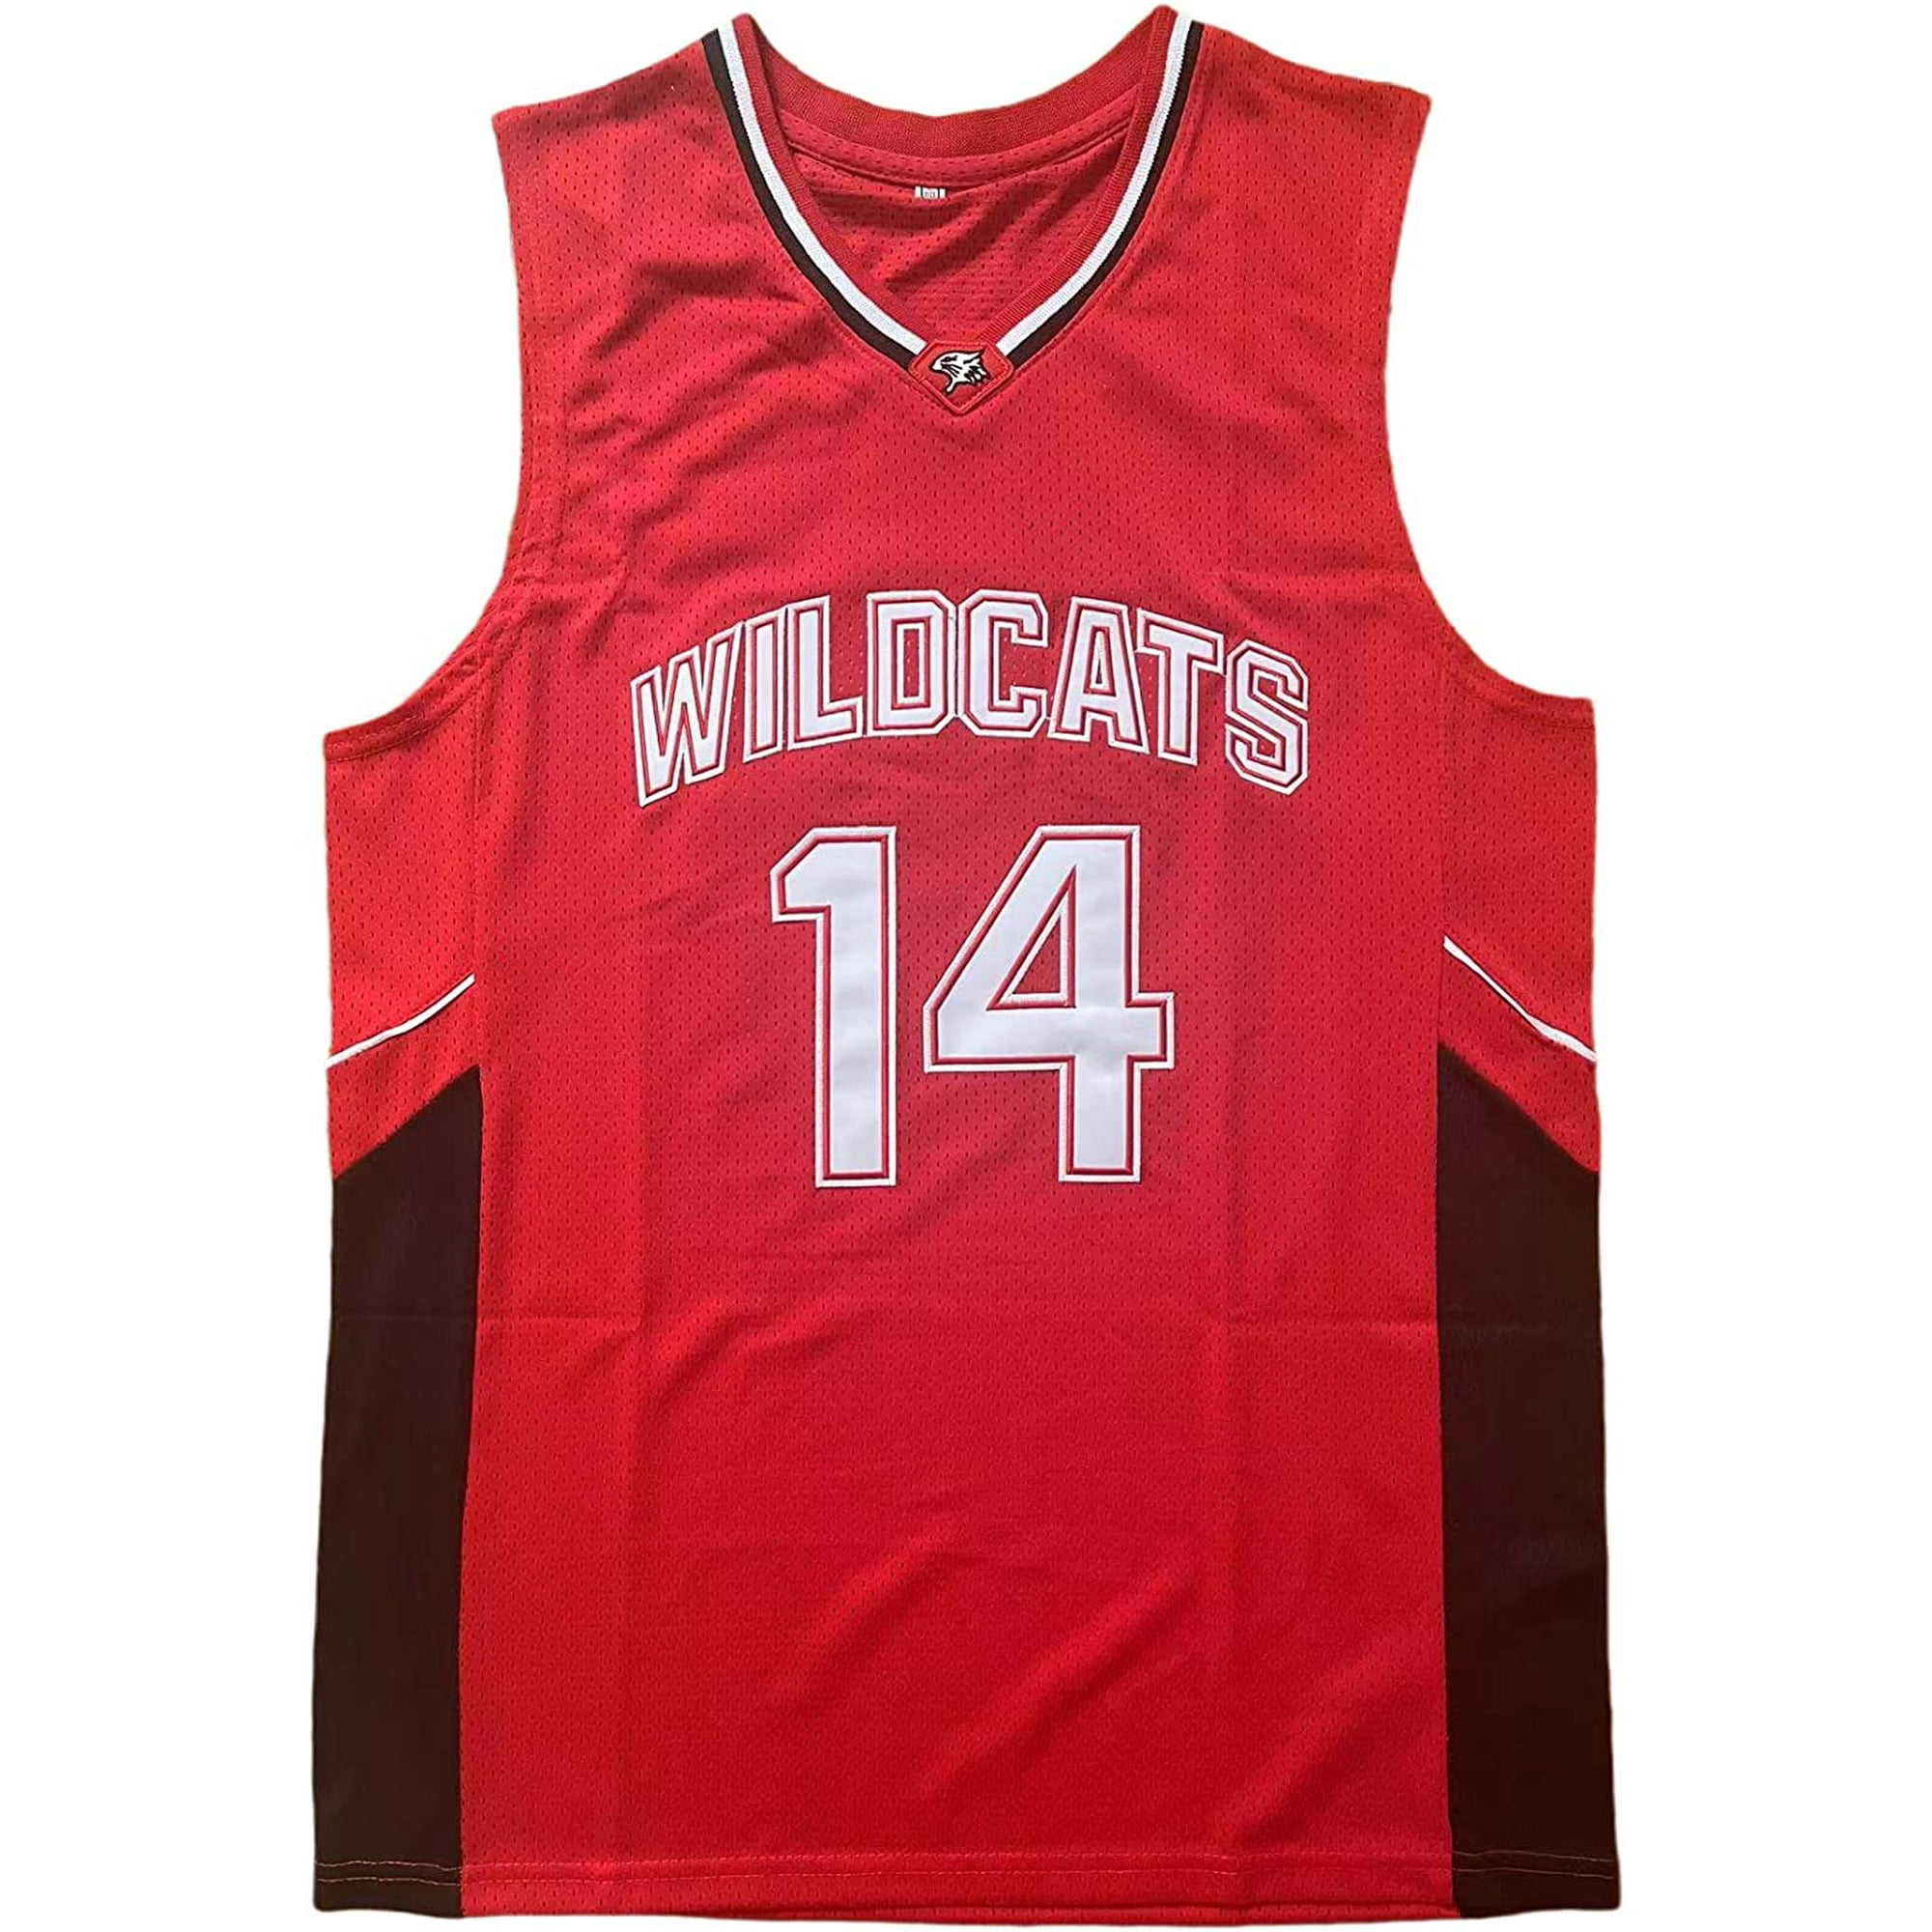 Youi-gifts Mens Wildcats High School Jersey,14 Troy Bolton Basketball Jersey,8 Chad Danforth Basketball Jersey/Shirt, Adult Unisex, Size: Medium, Red